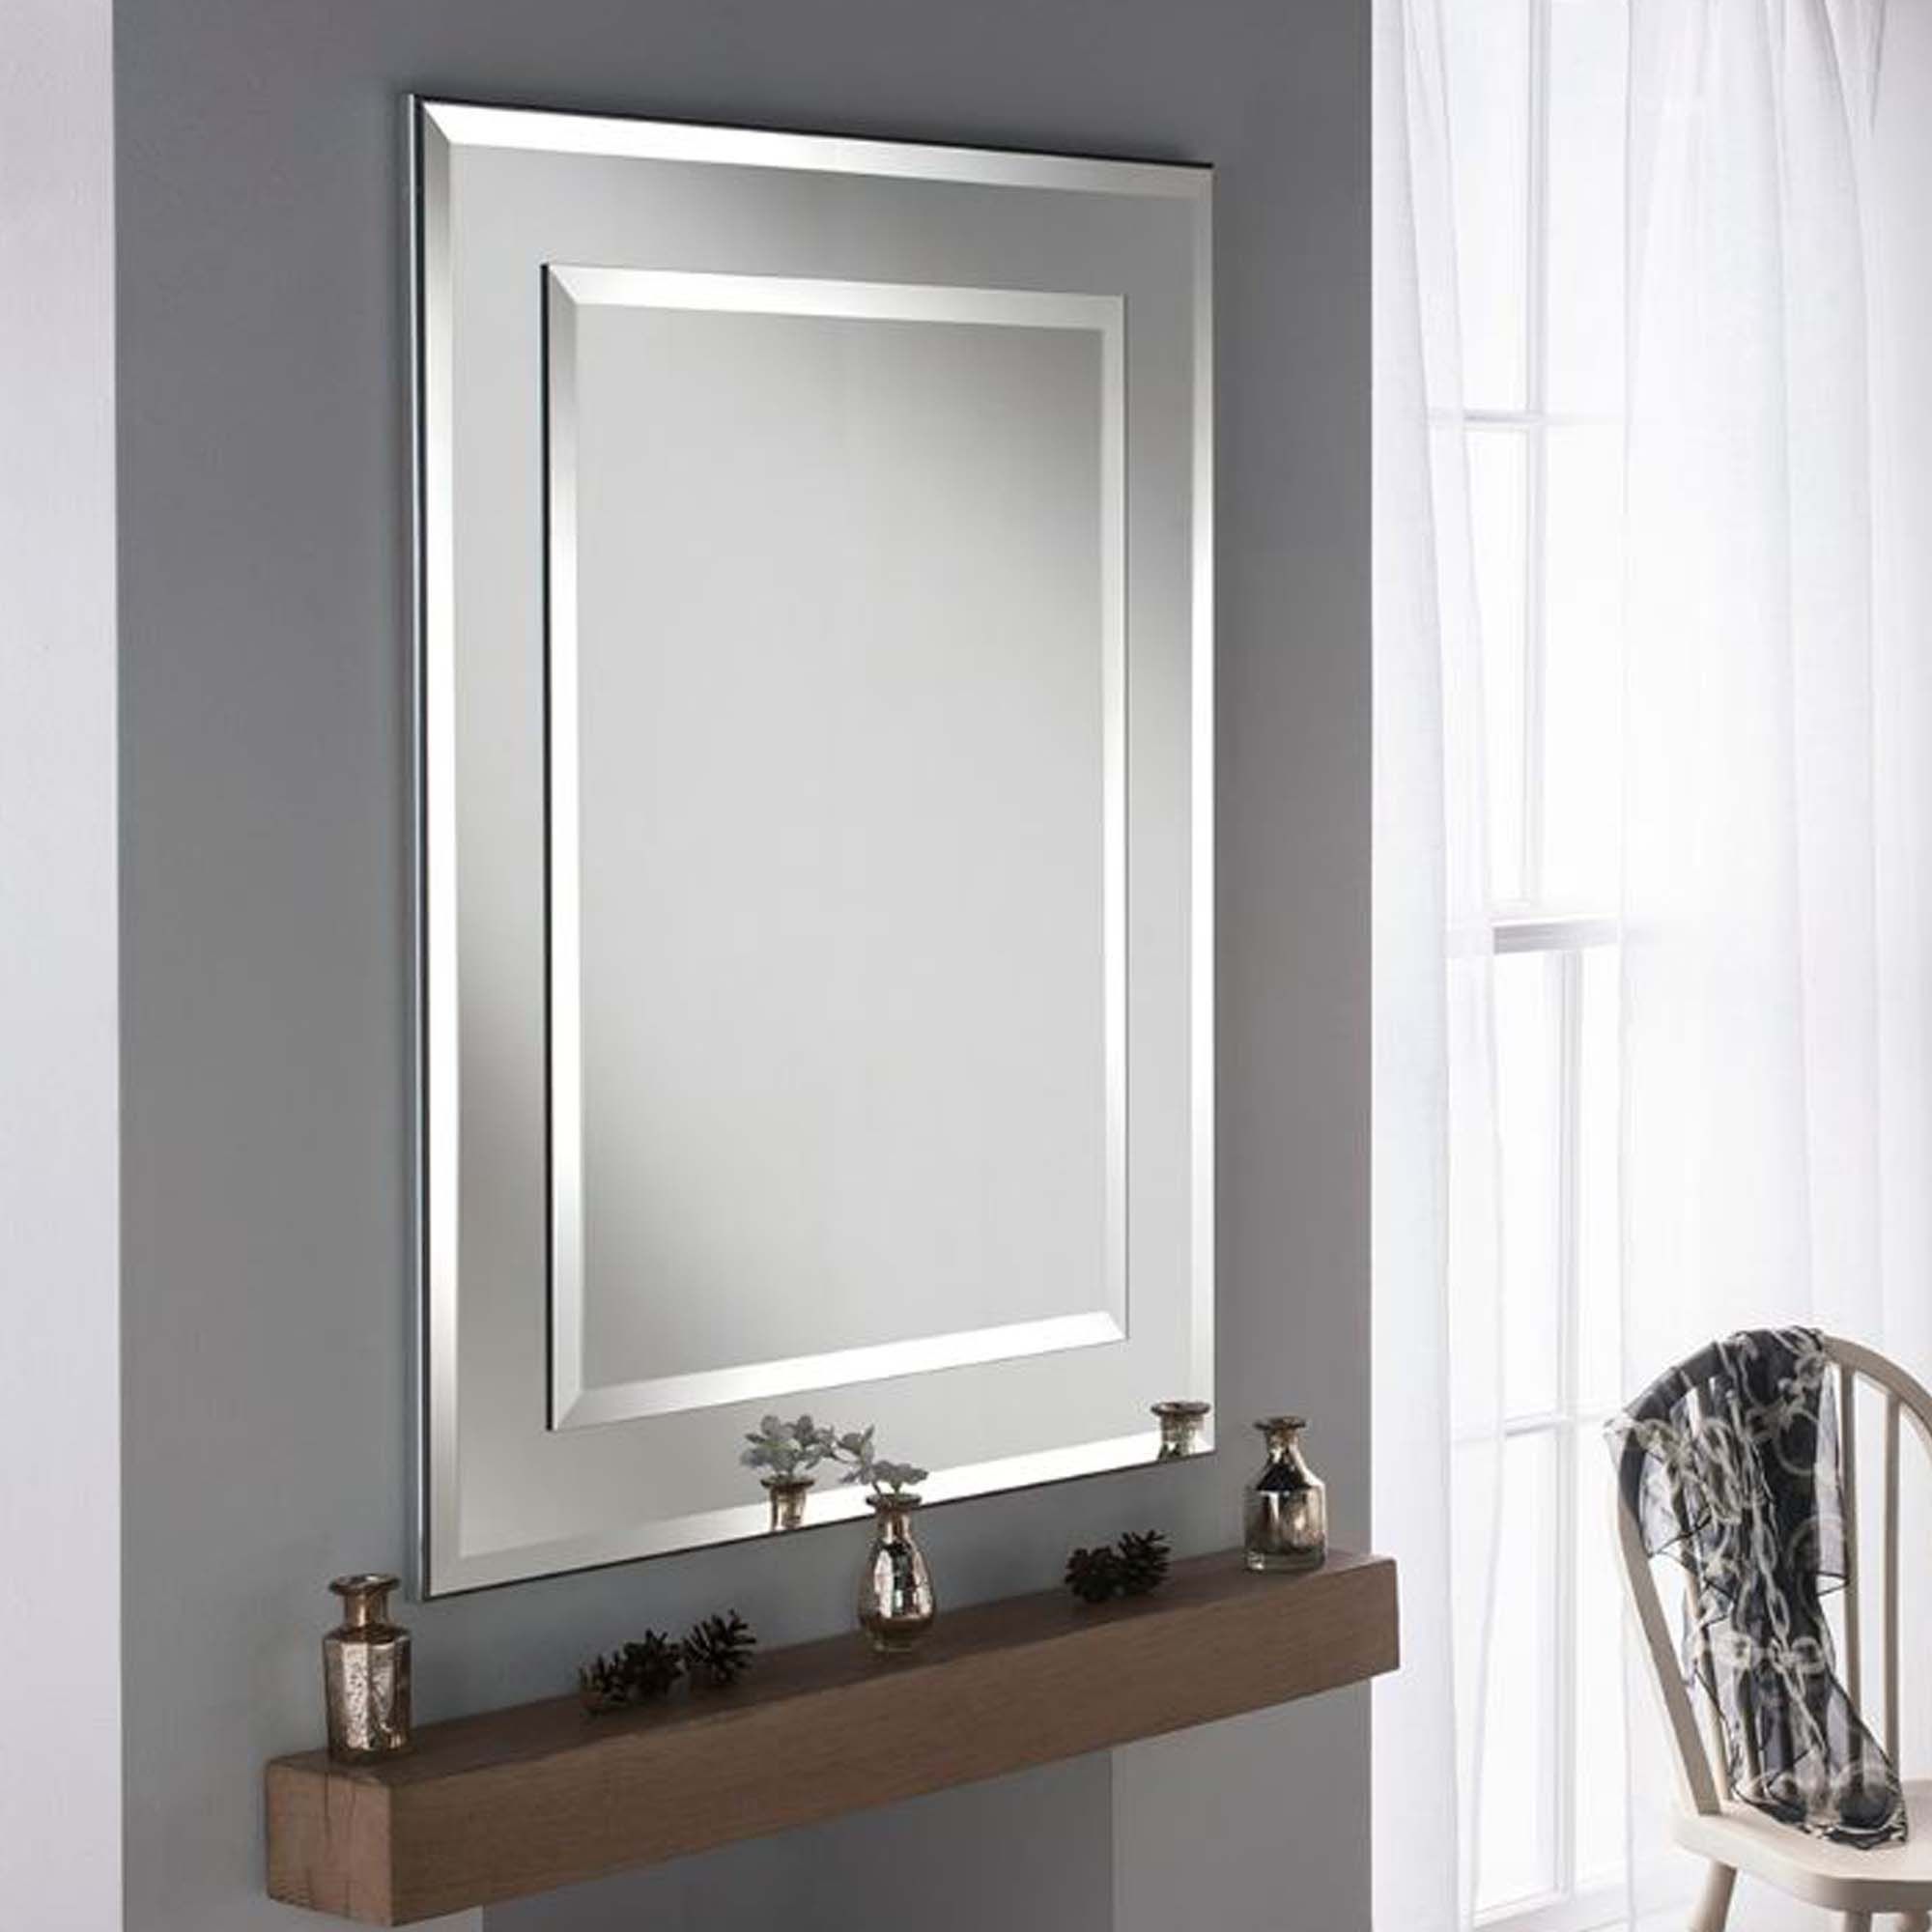 Contemporary Wall Mirror Rectangular Silver Frame | Decor Throughout Silver High Wall Mirrors (View 10 of 15)